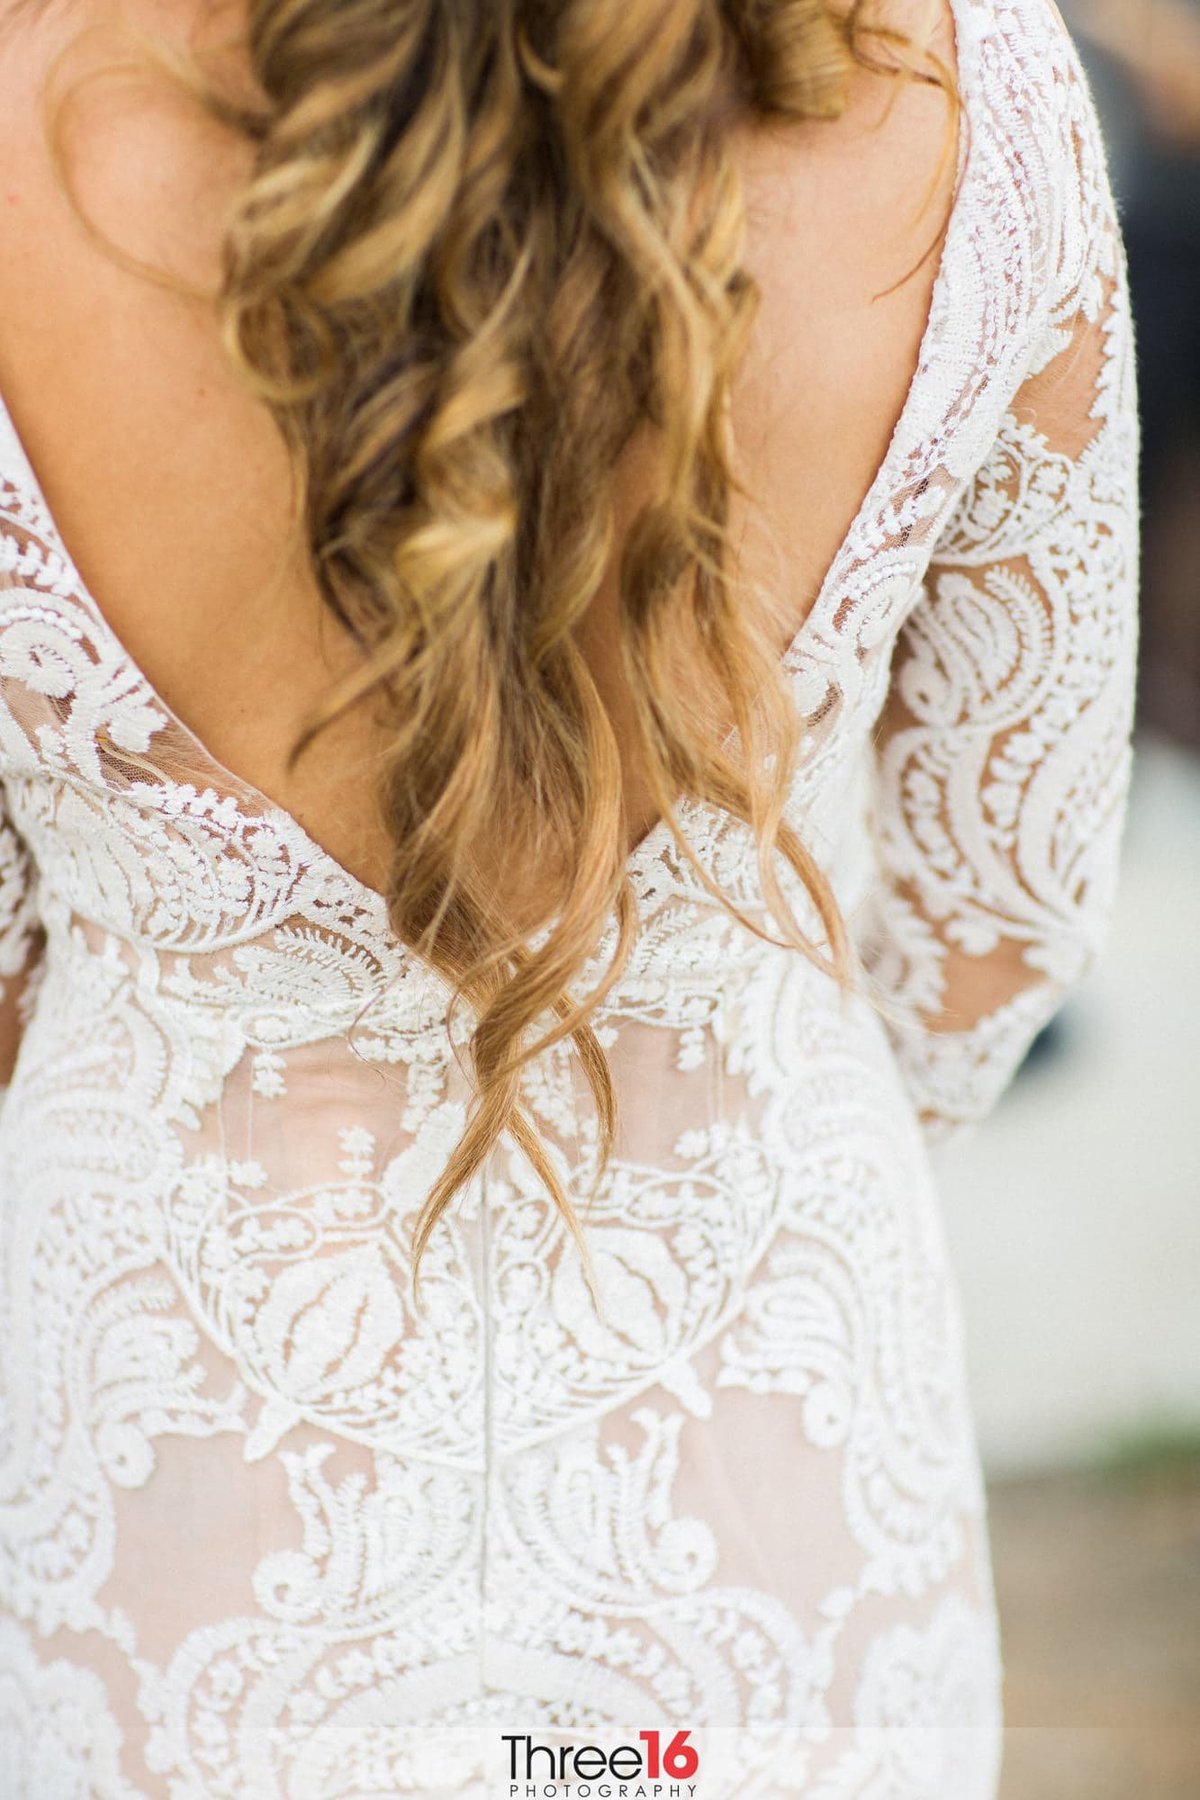 Back of Brides dress with long hair